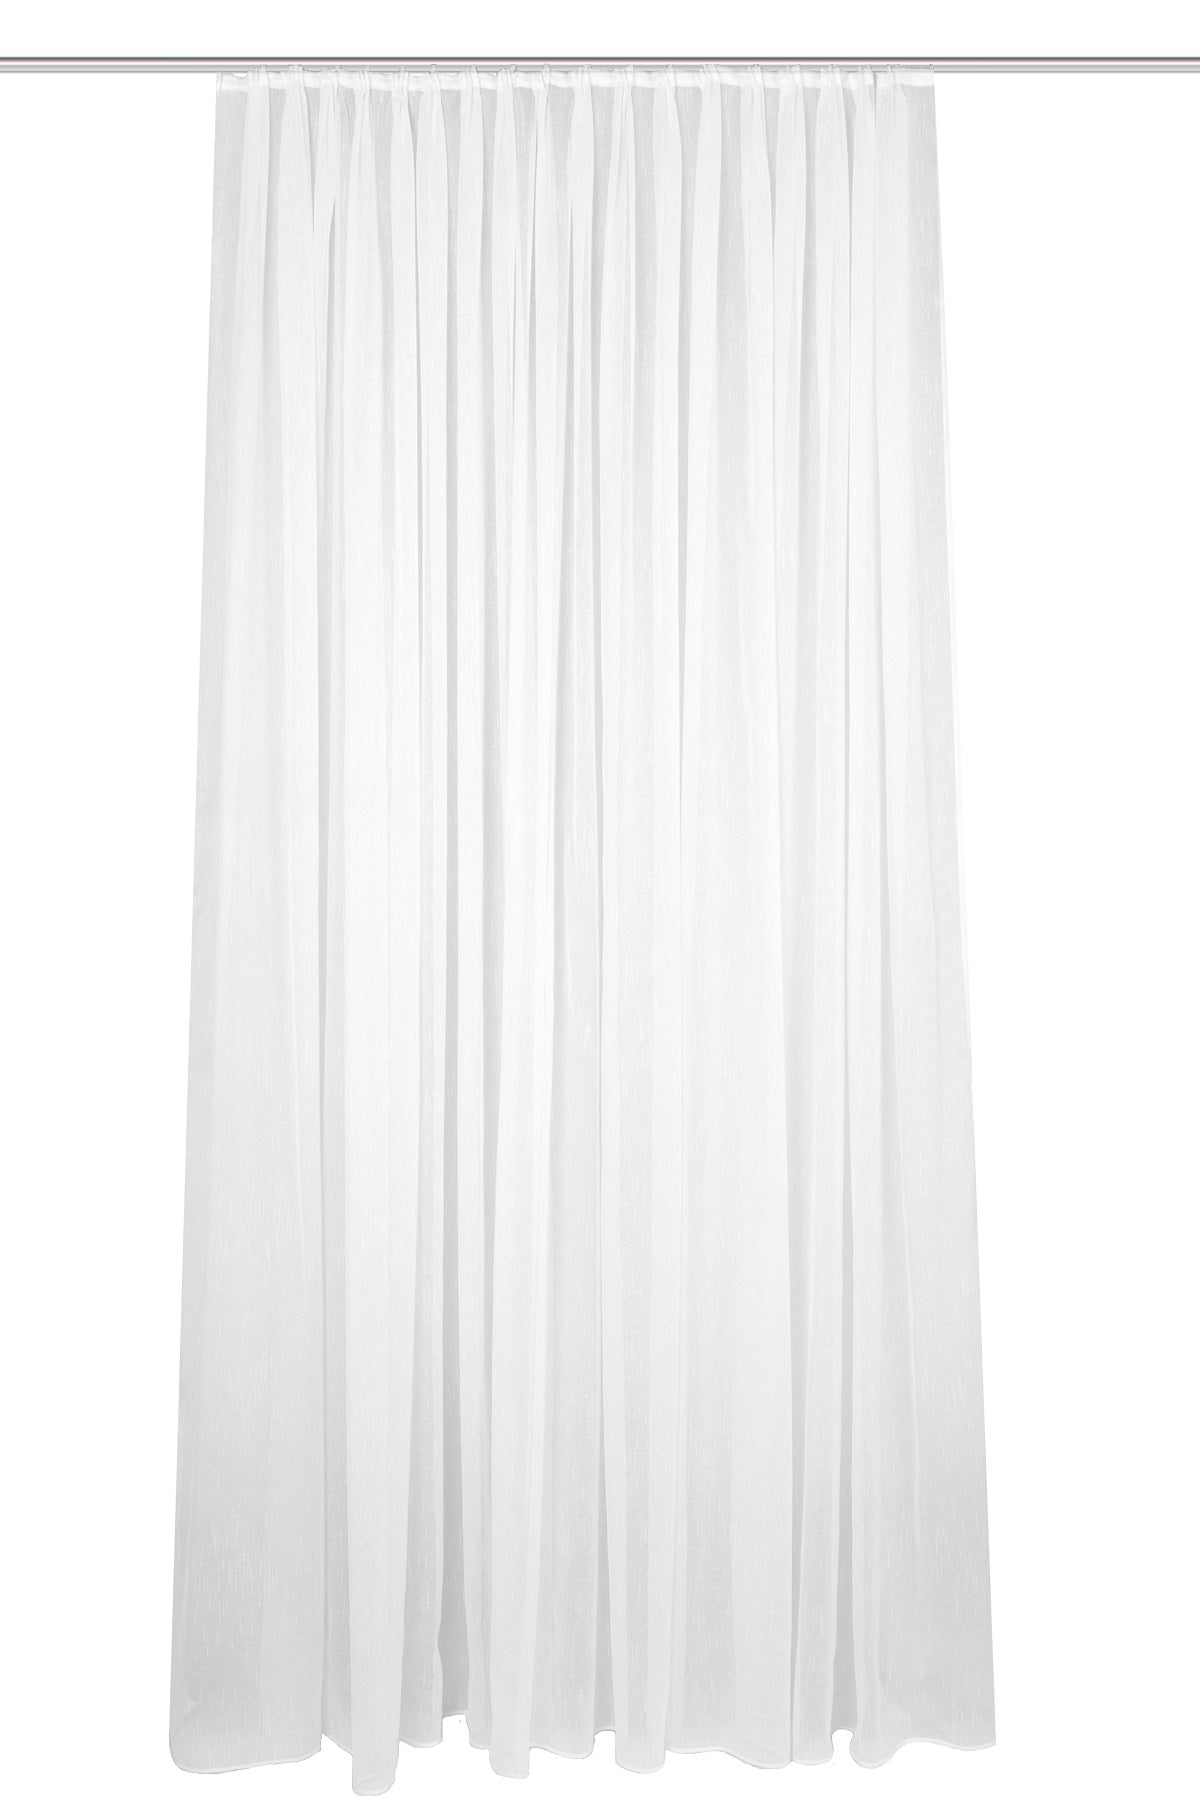 Day curtain white Fay